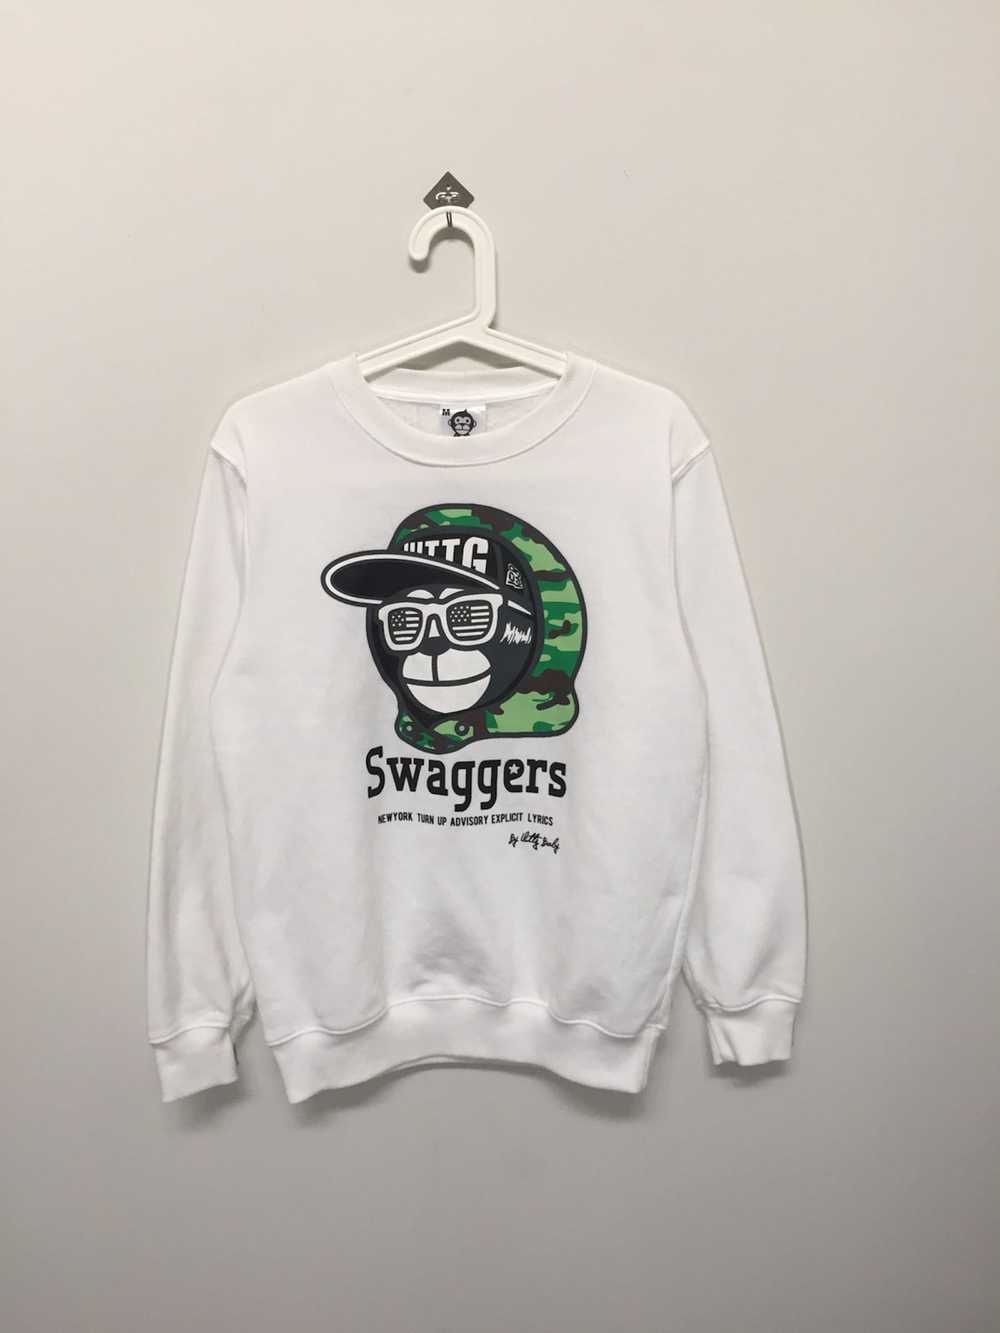 Brand × Japanese Brand Uittg Baby Swaggers Spell … - image 1